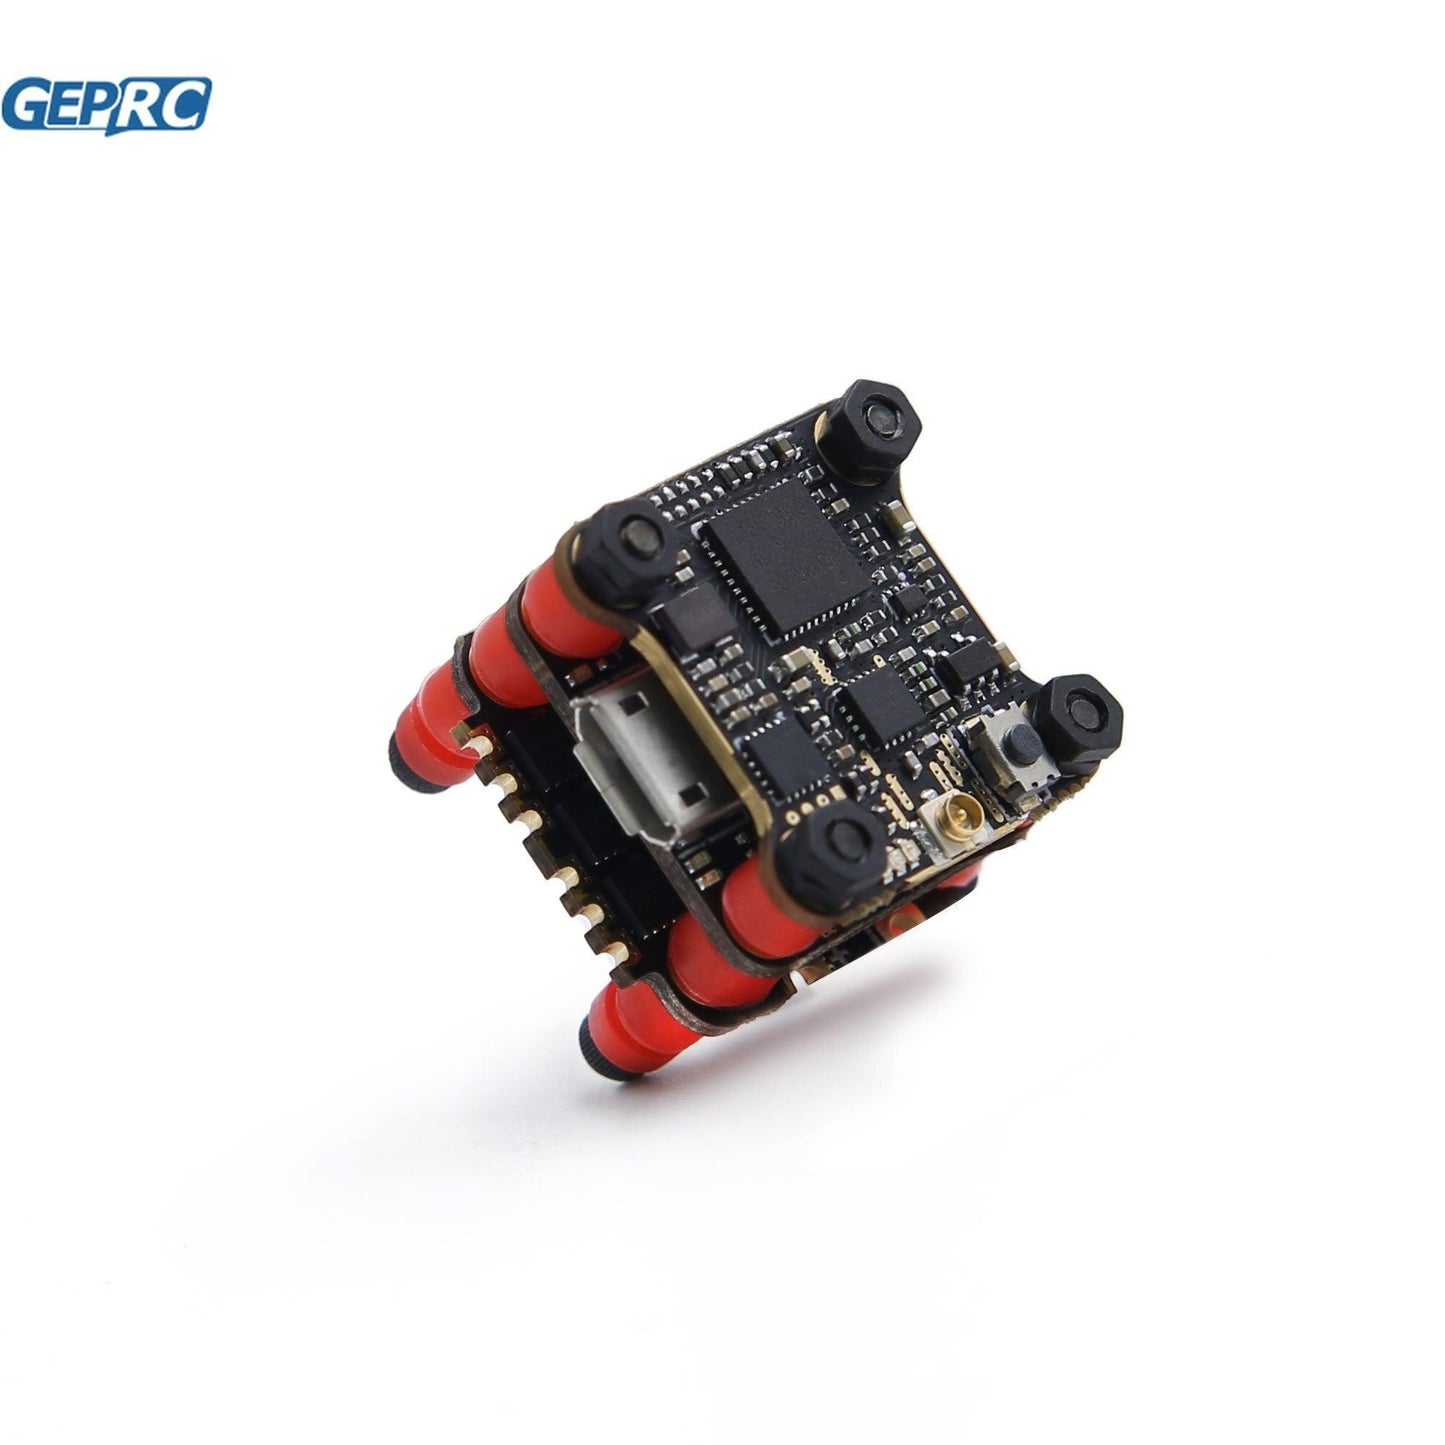 GEPRC STABLE F411 Electoronics All In One ESC Flight Controller - RCDrone